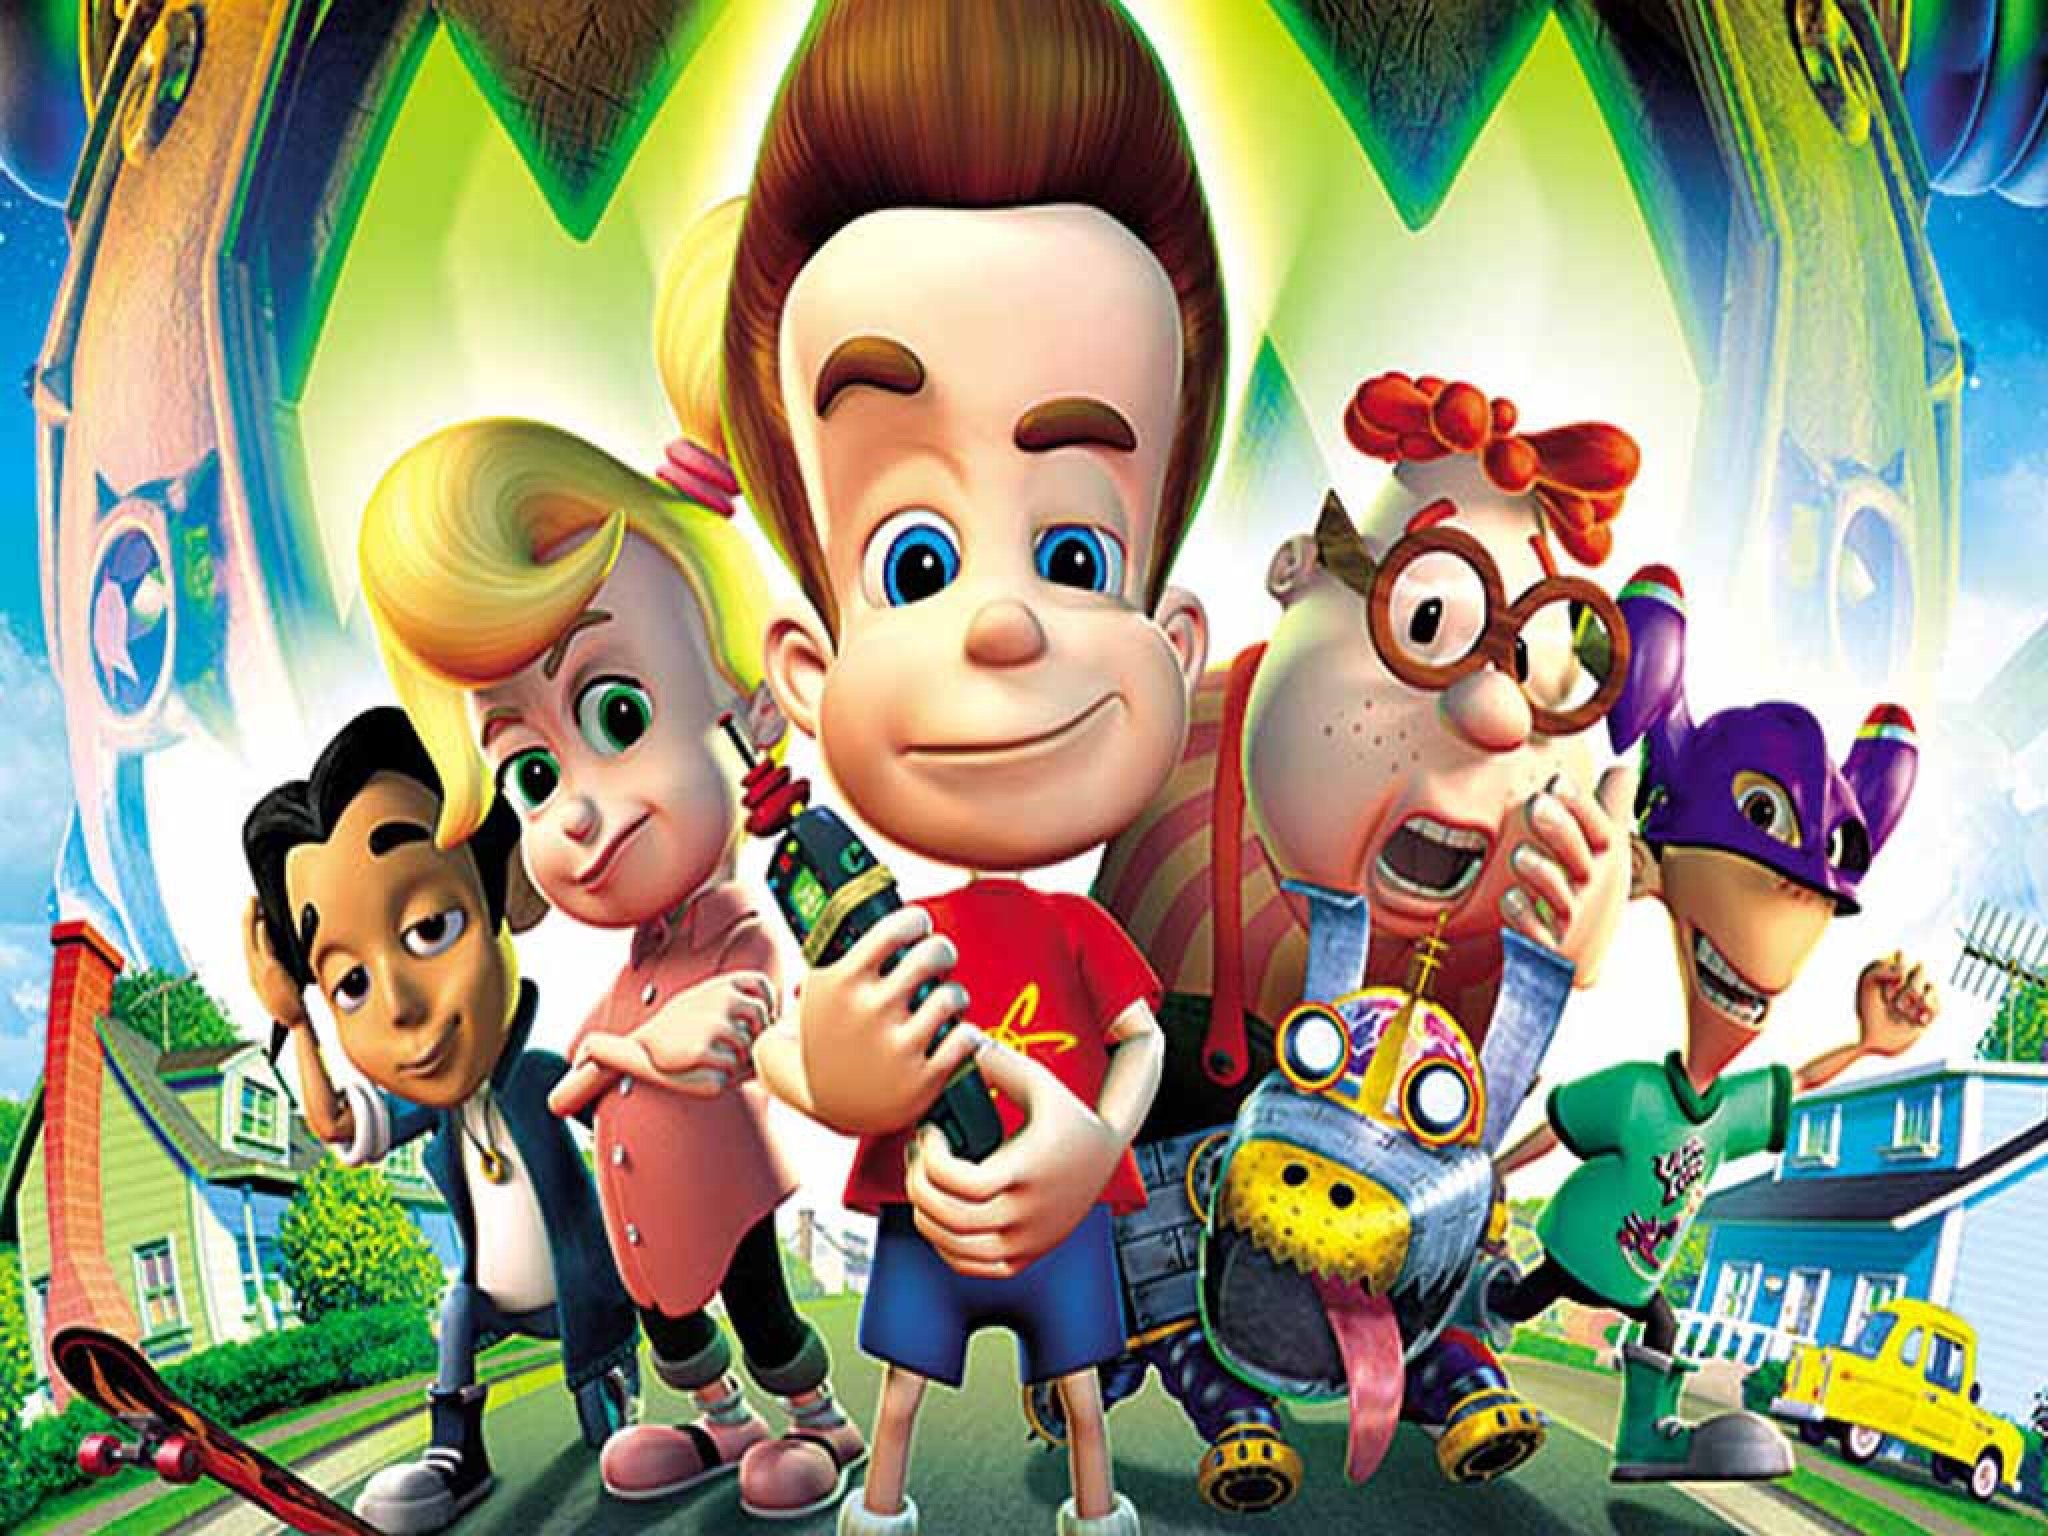 Free download Jimmy neutron all characters wallpaper Nickelodeon and Disney [2048x1536] for your Desktop, Mobile & Tablet. Explore Jimmy Neutron Wallpaper. Jimmy Neutron Wallpaper, Jimmy Neutron Sheen Estevez Wallpaper